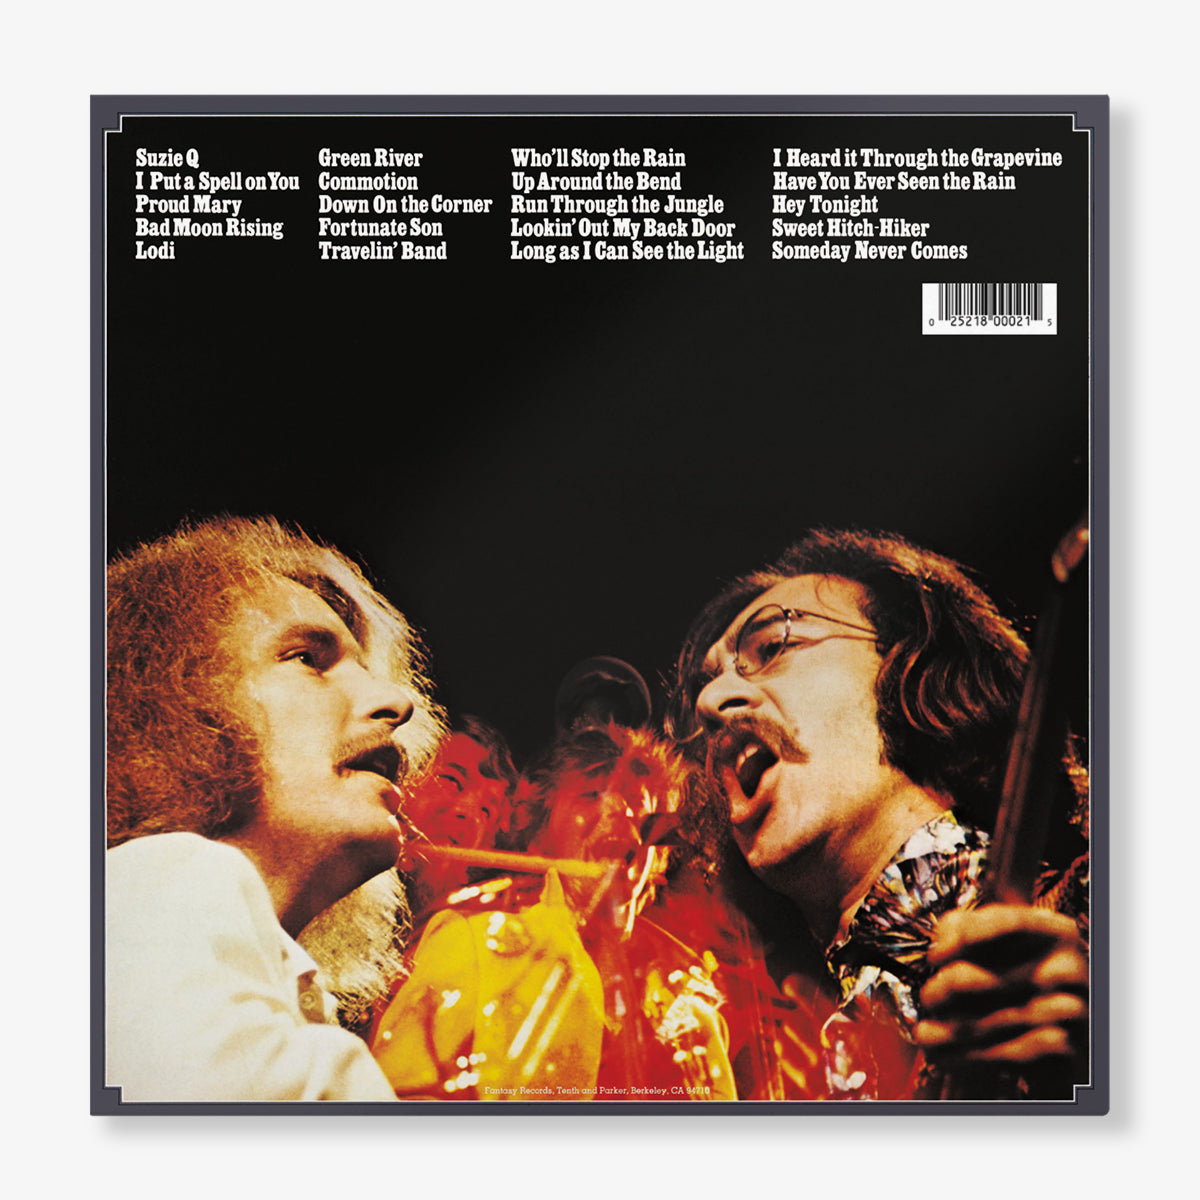 Creedence Clearwater Revival – Chronicle: 20 Greatest Hits (2-LP 